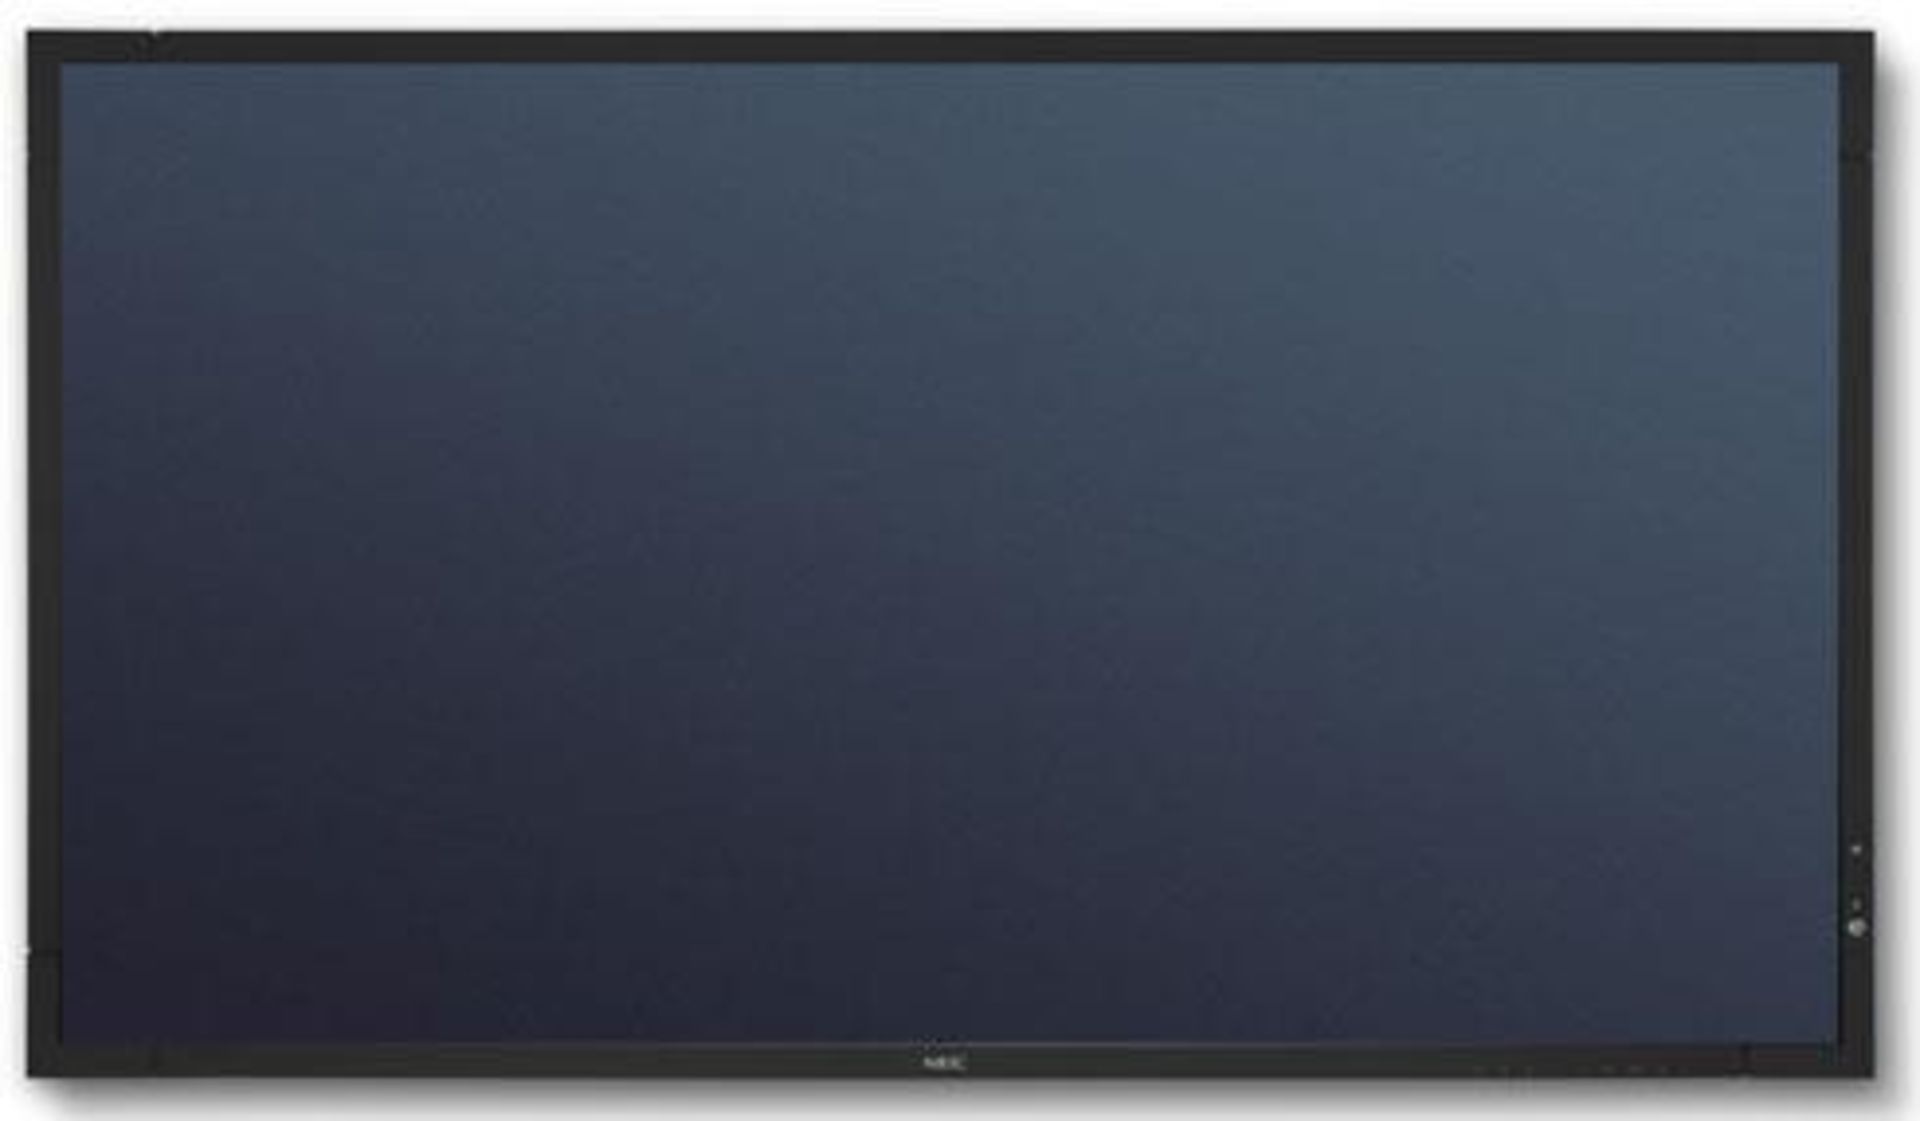 NEC 40" MultiSync X401S LCD Monitor - Boxed Ex-demo model - Superficial scratch to bottom of screen